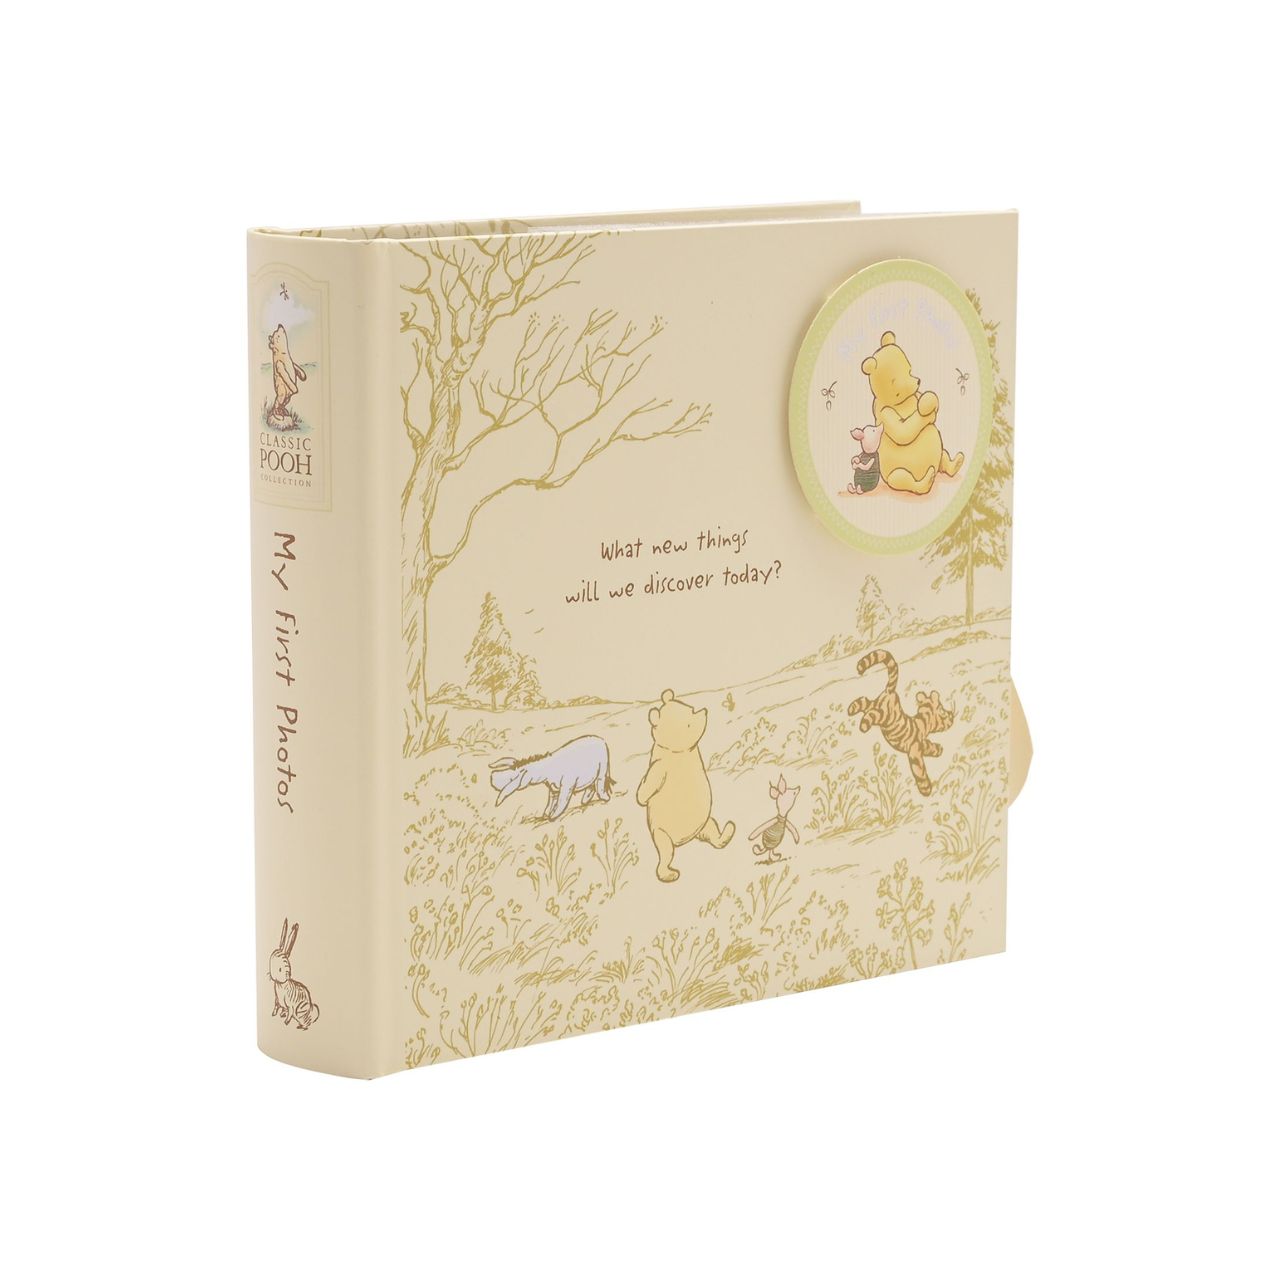 Disney Classic Pooh Heritage Photo Album Box My First Photos  This Winnie the Pooh keepsake photo album has been designed to reflect E.H. Shepard's original illustrations from the original A. A. Milne books, to be cherished for many years. Includes 80 photo sleeves.